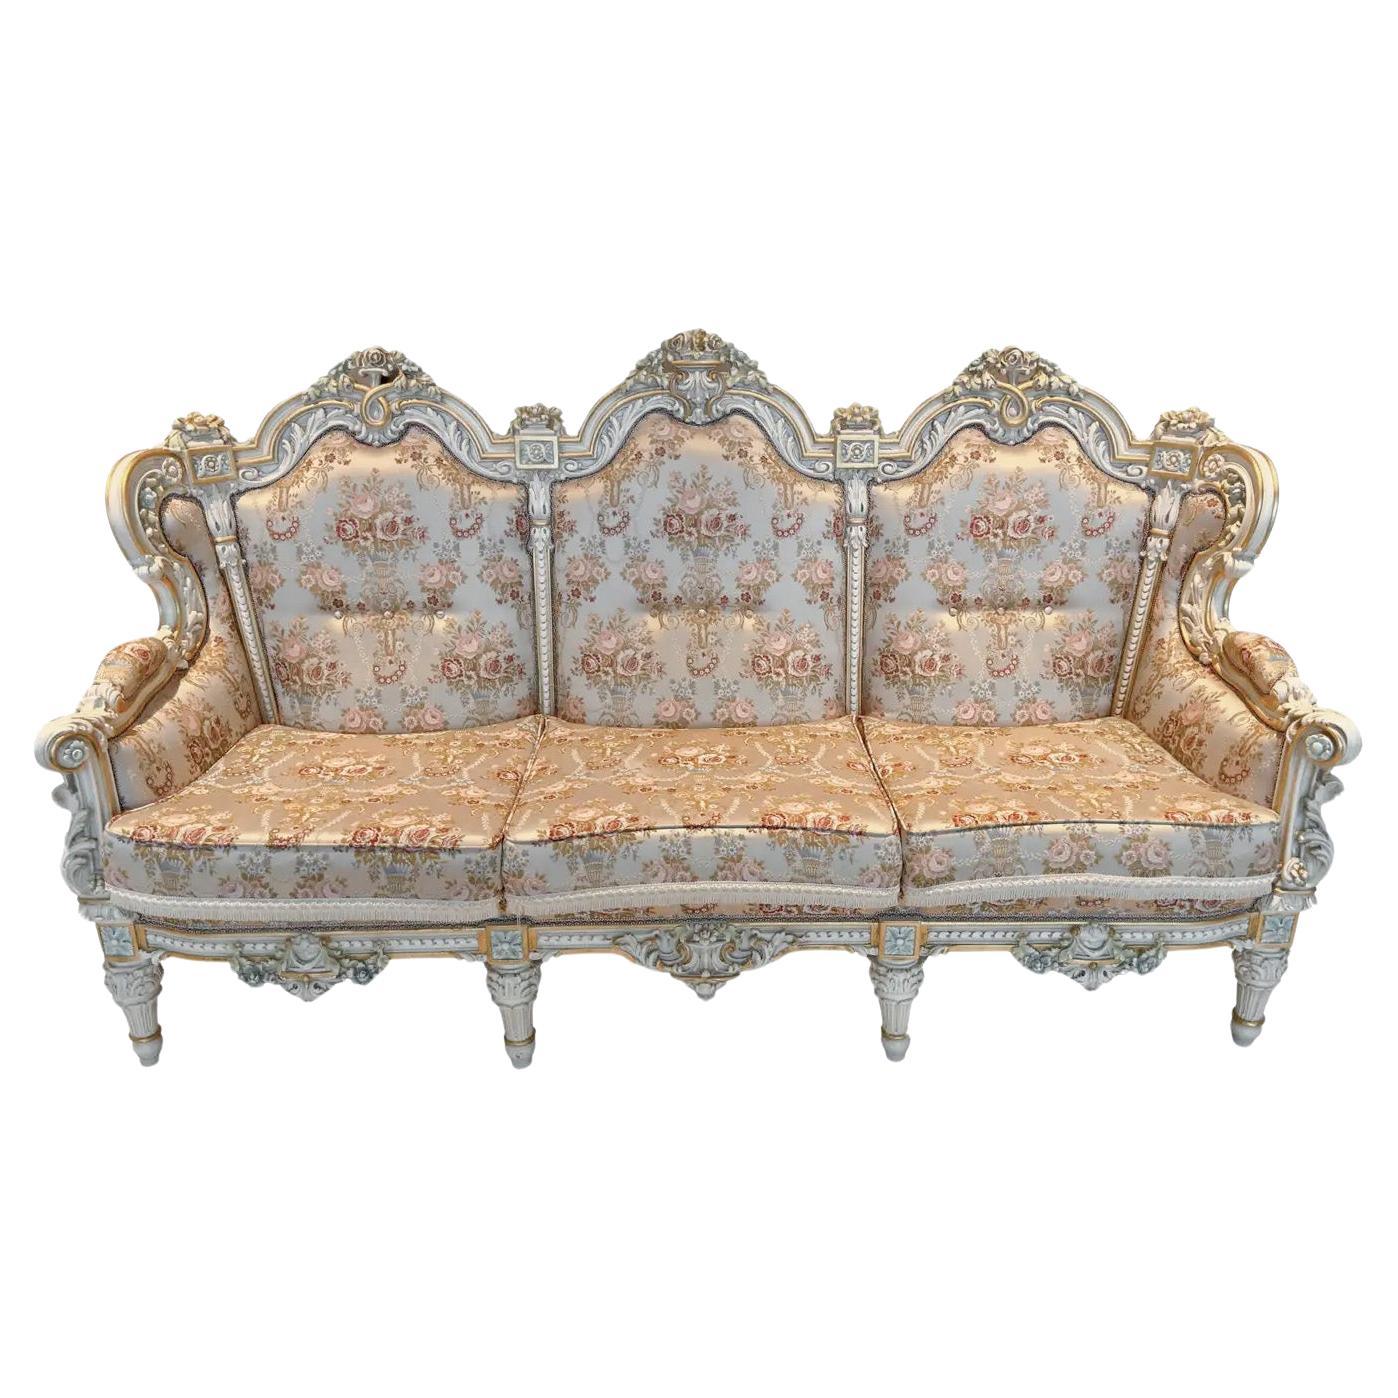 Italian Neoclassical Baroque Style Sofa with fine floral silk upholstery 